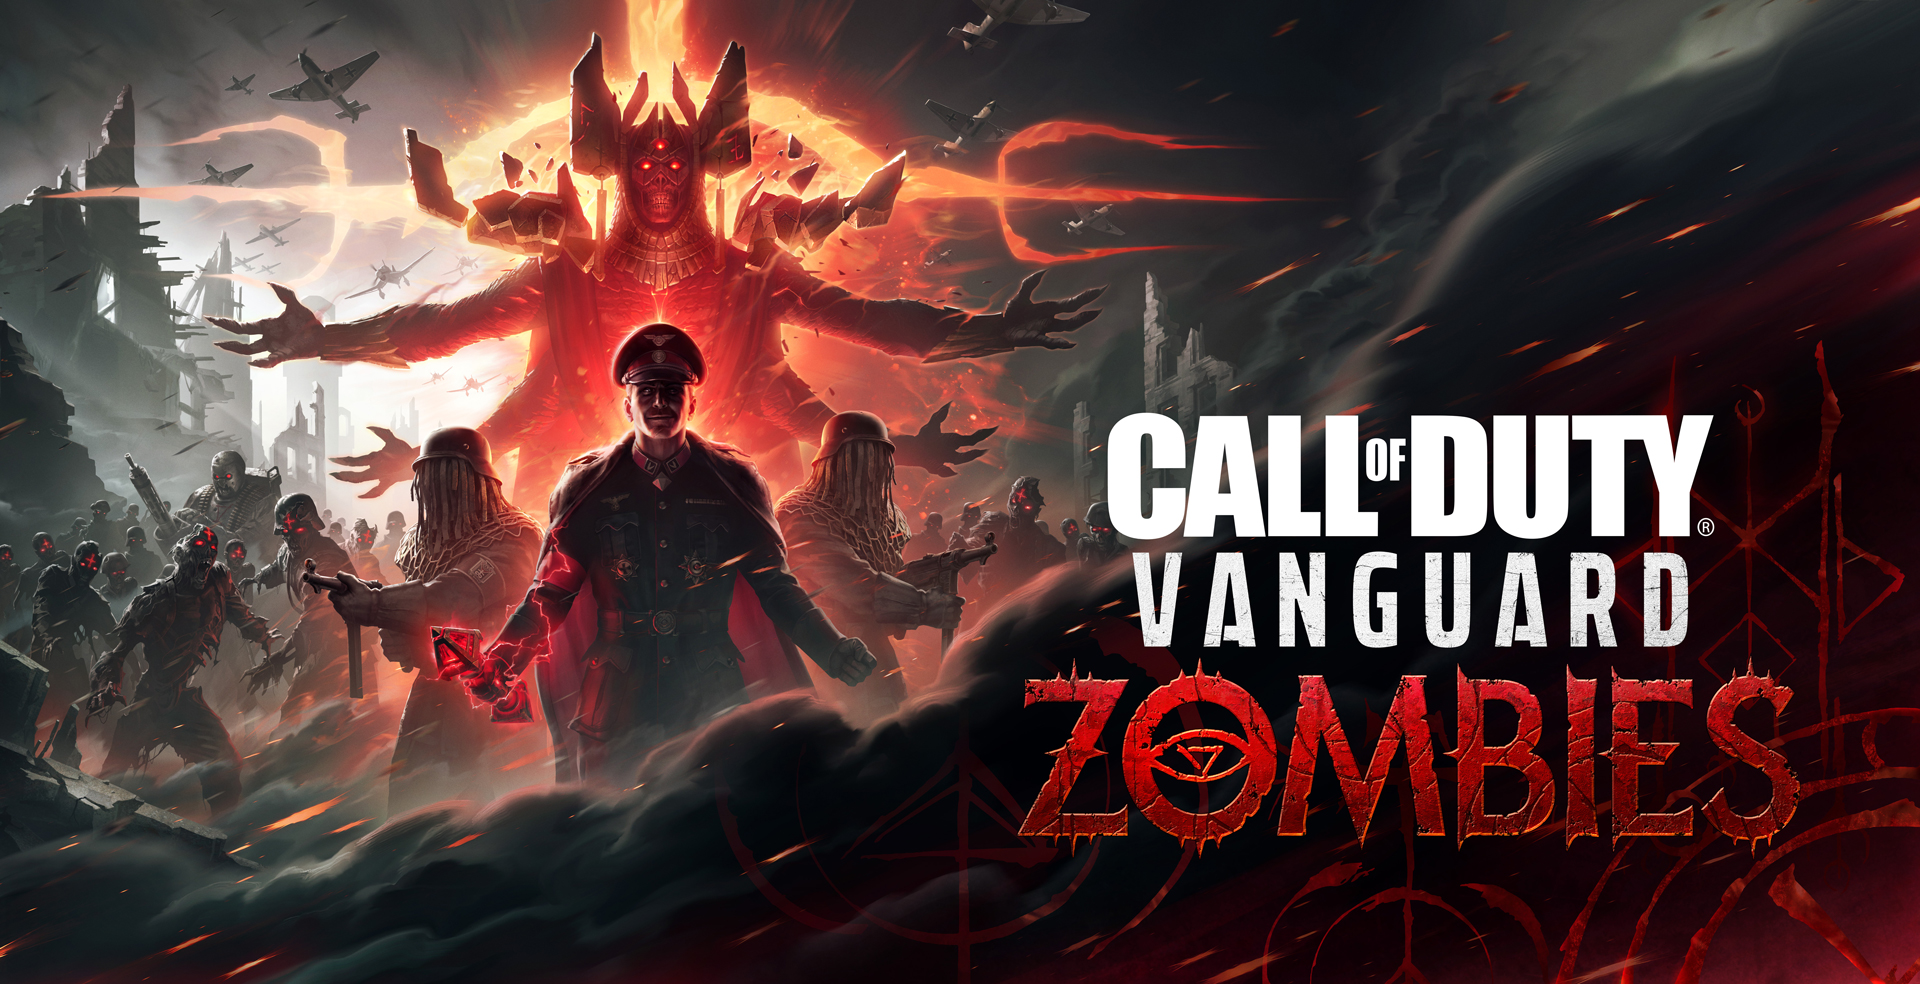 Call of Duty: Vanguard Zombies trailer appeared after a leak.